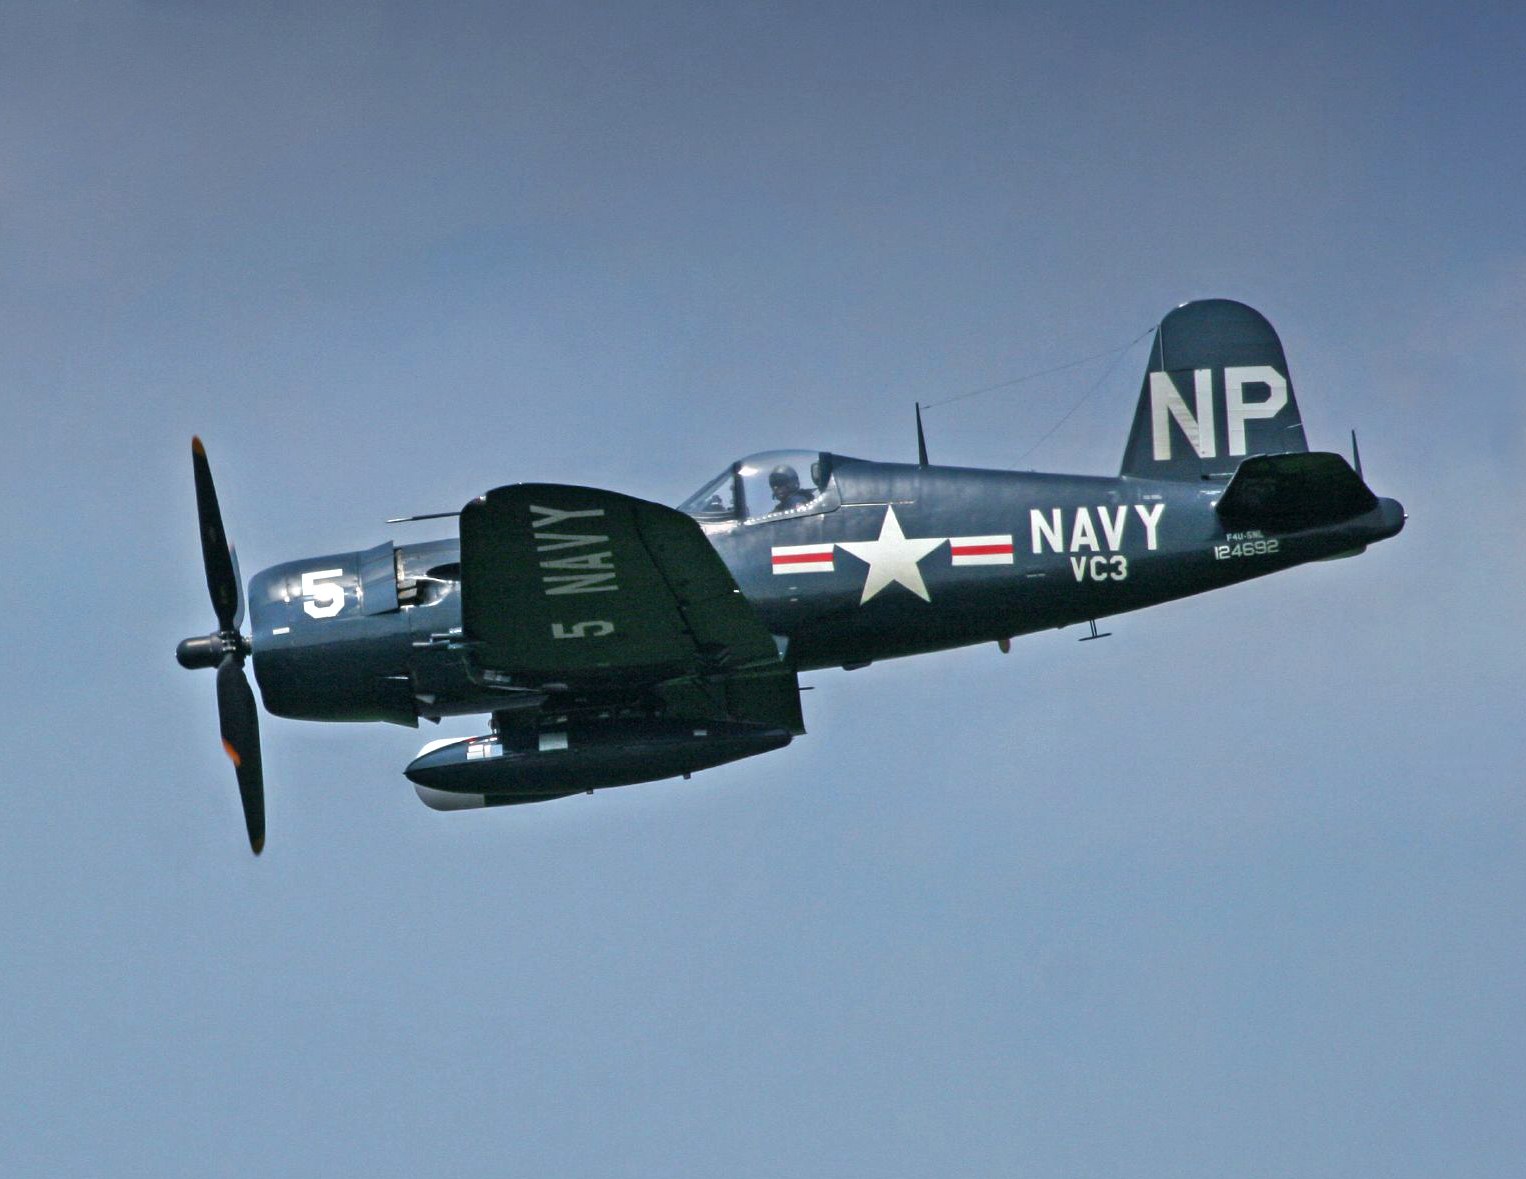 This was the final combat flight for the P-51 and F4U Corsair | We The Mighty